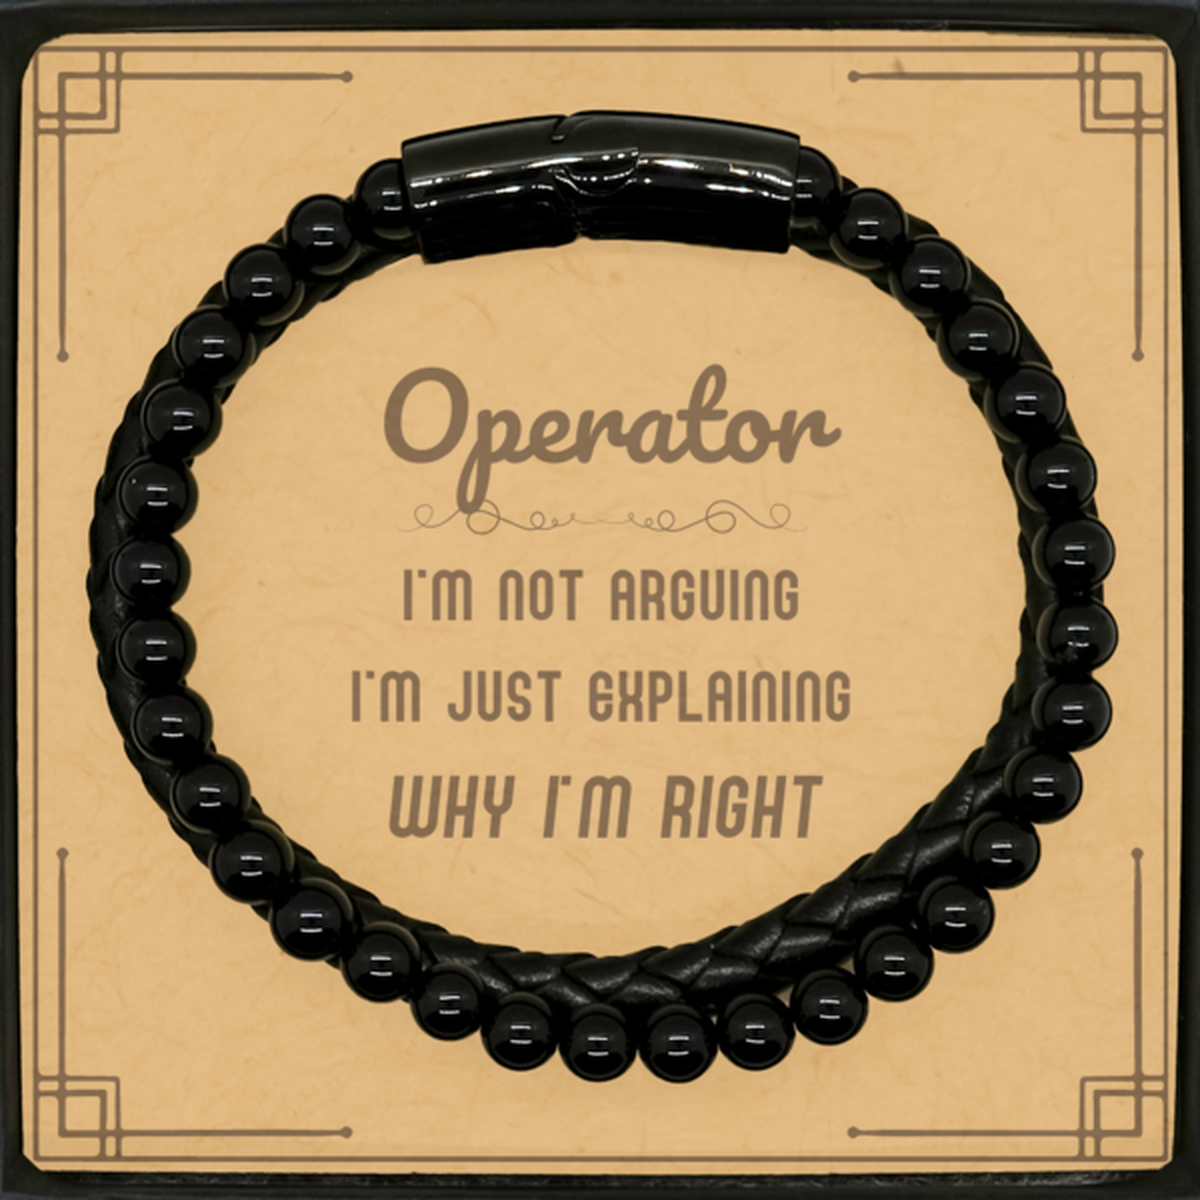 Operator I'm not Arguing. I'm Just Explaining Why I'm RIGHT Stone Leather Bracelets, Funny Saying Quote Operator Gifts For Operator Message Card Graduation Birthday Christmas Gifts for Men Women Coworker